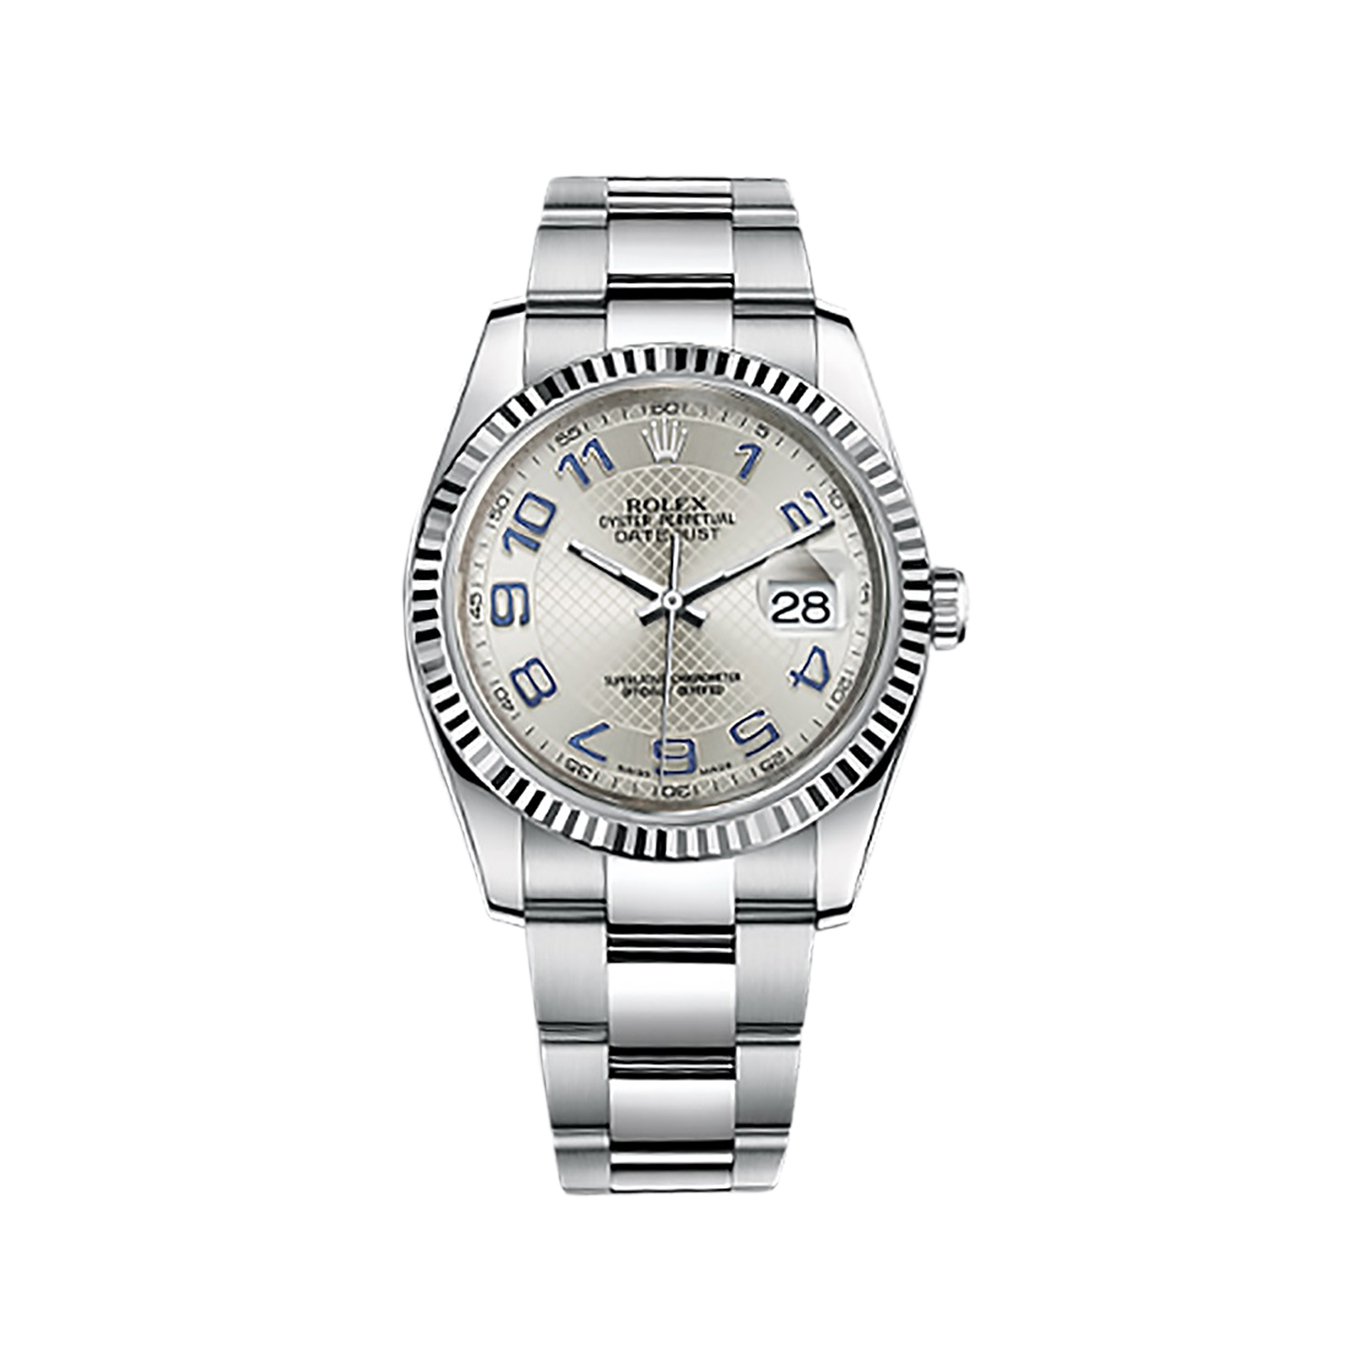 Datejust 36 116234 White Gold & Stainless Steel Watch (Silver)